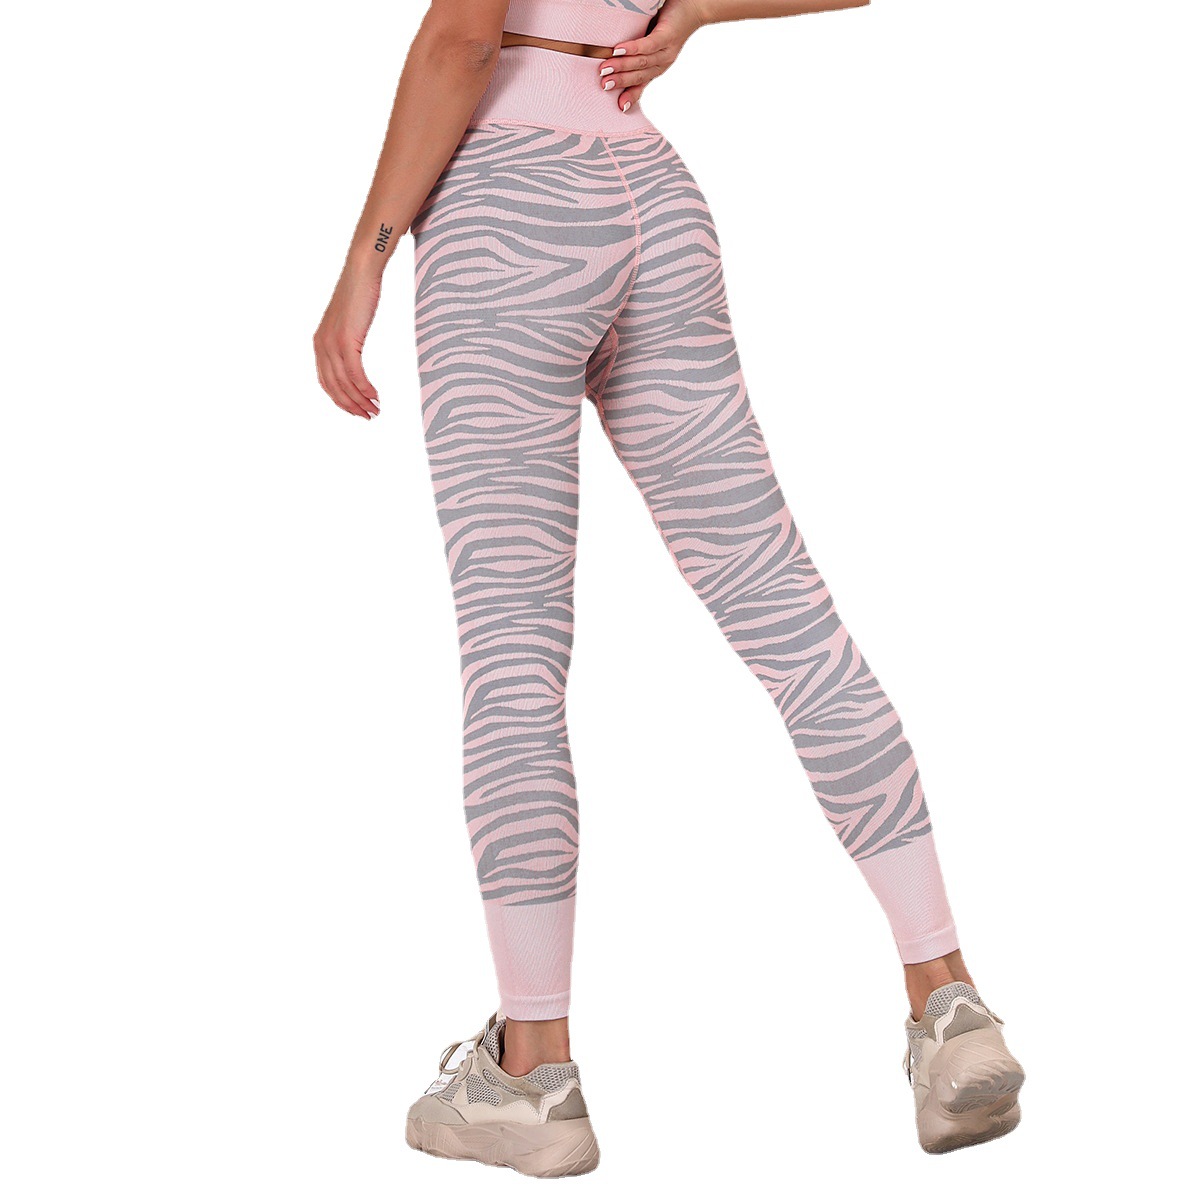 Wholesale Seamless Stripe Colorblock Yoga Pants: Stay Ahead in the Global Fitness Market | ZHIHUI